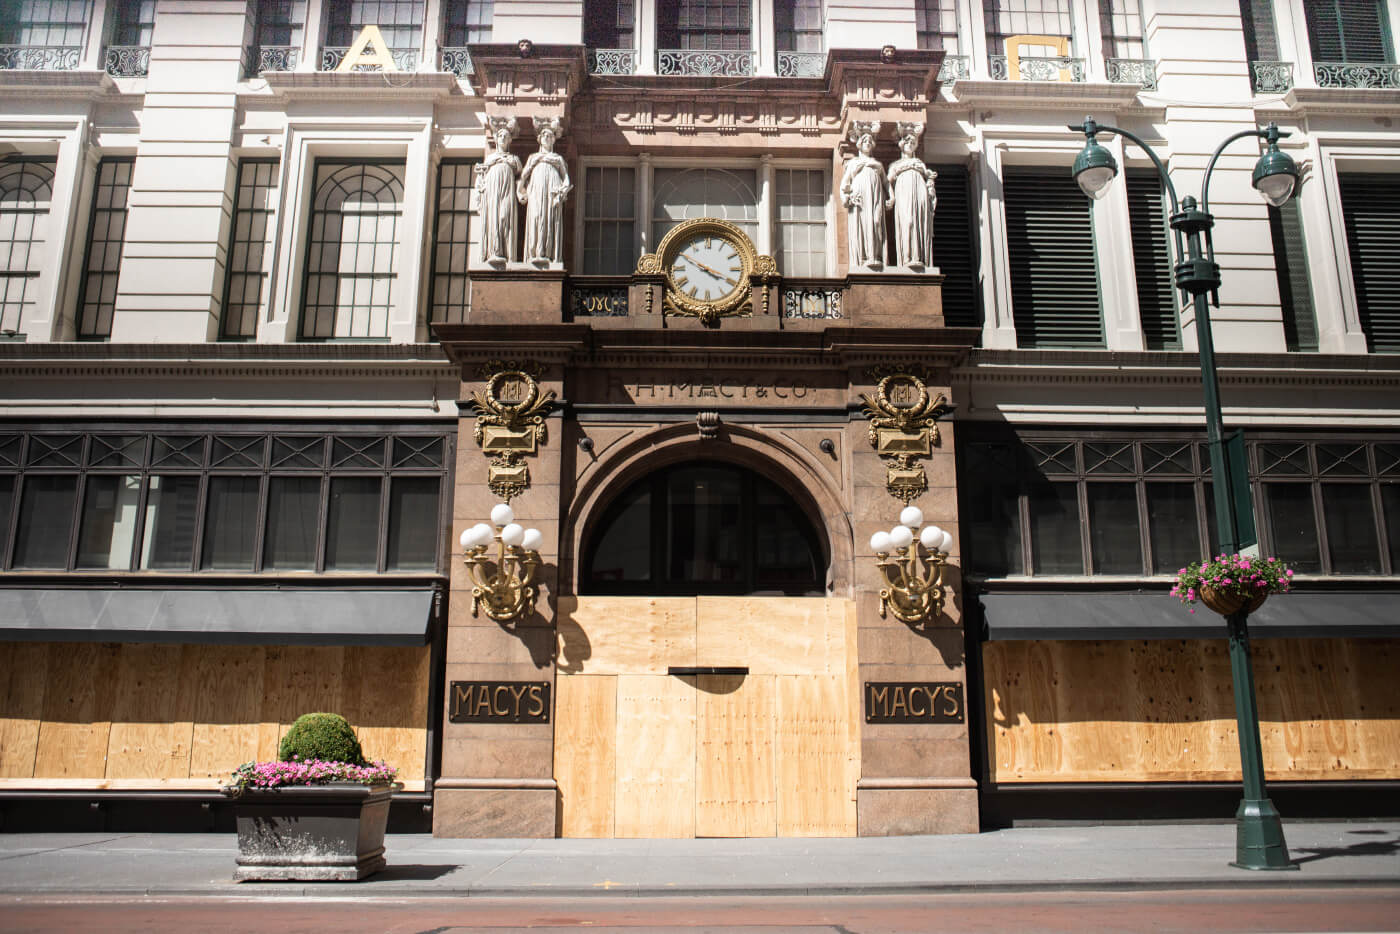 A retail store boarded up but soon reopening, which the AIA has put out guidelines for